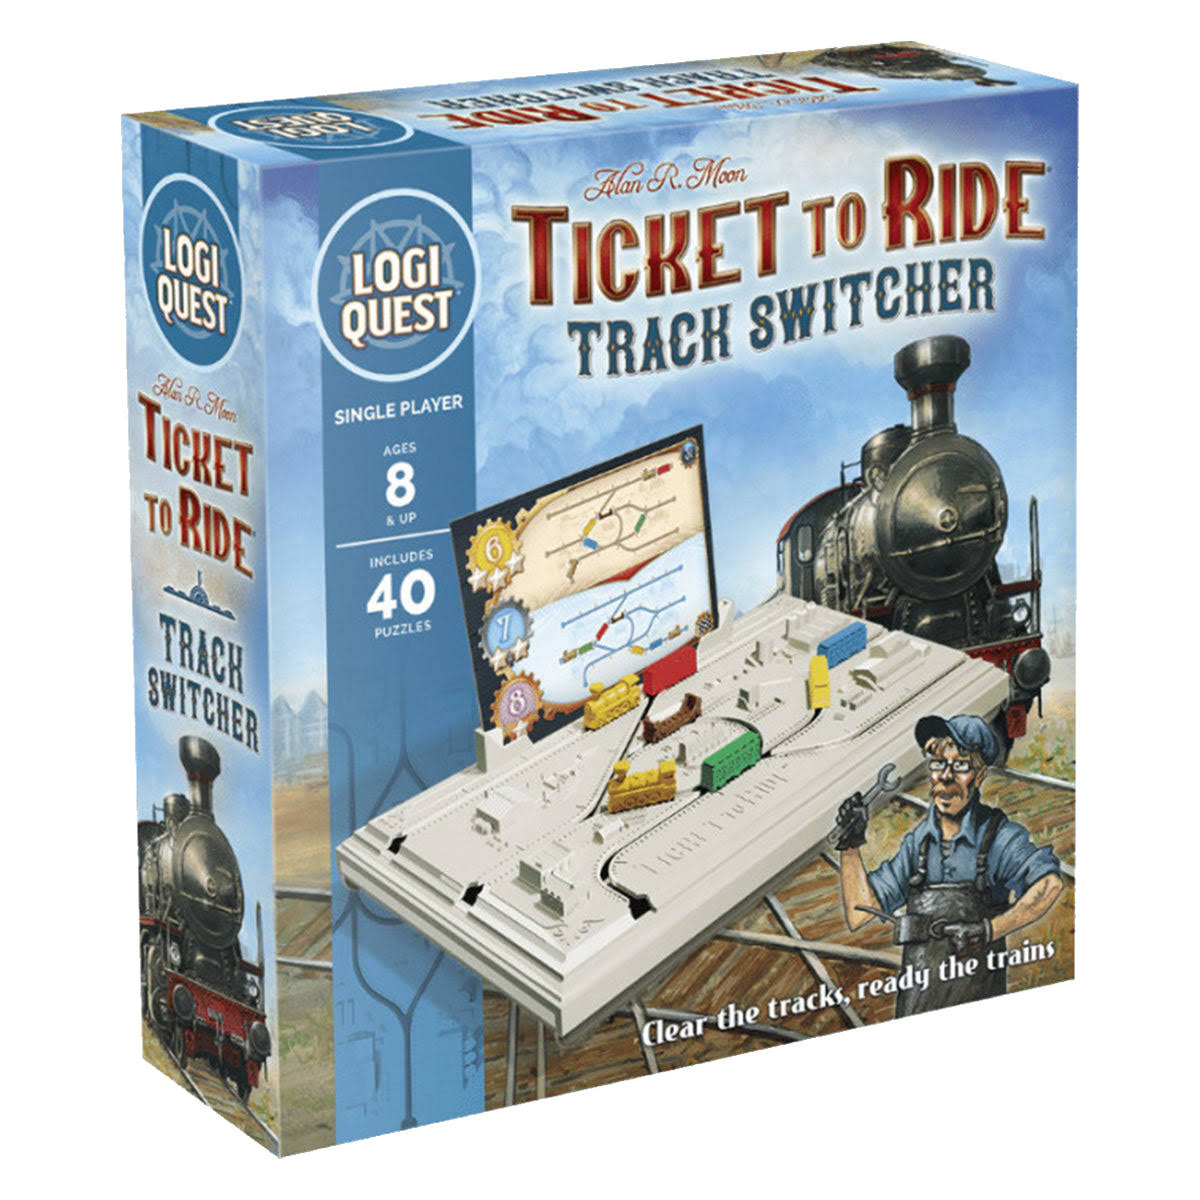 Mixlore Logiquest Ticket to Ride Track Switcher Board Game